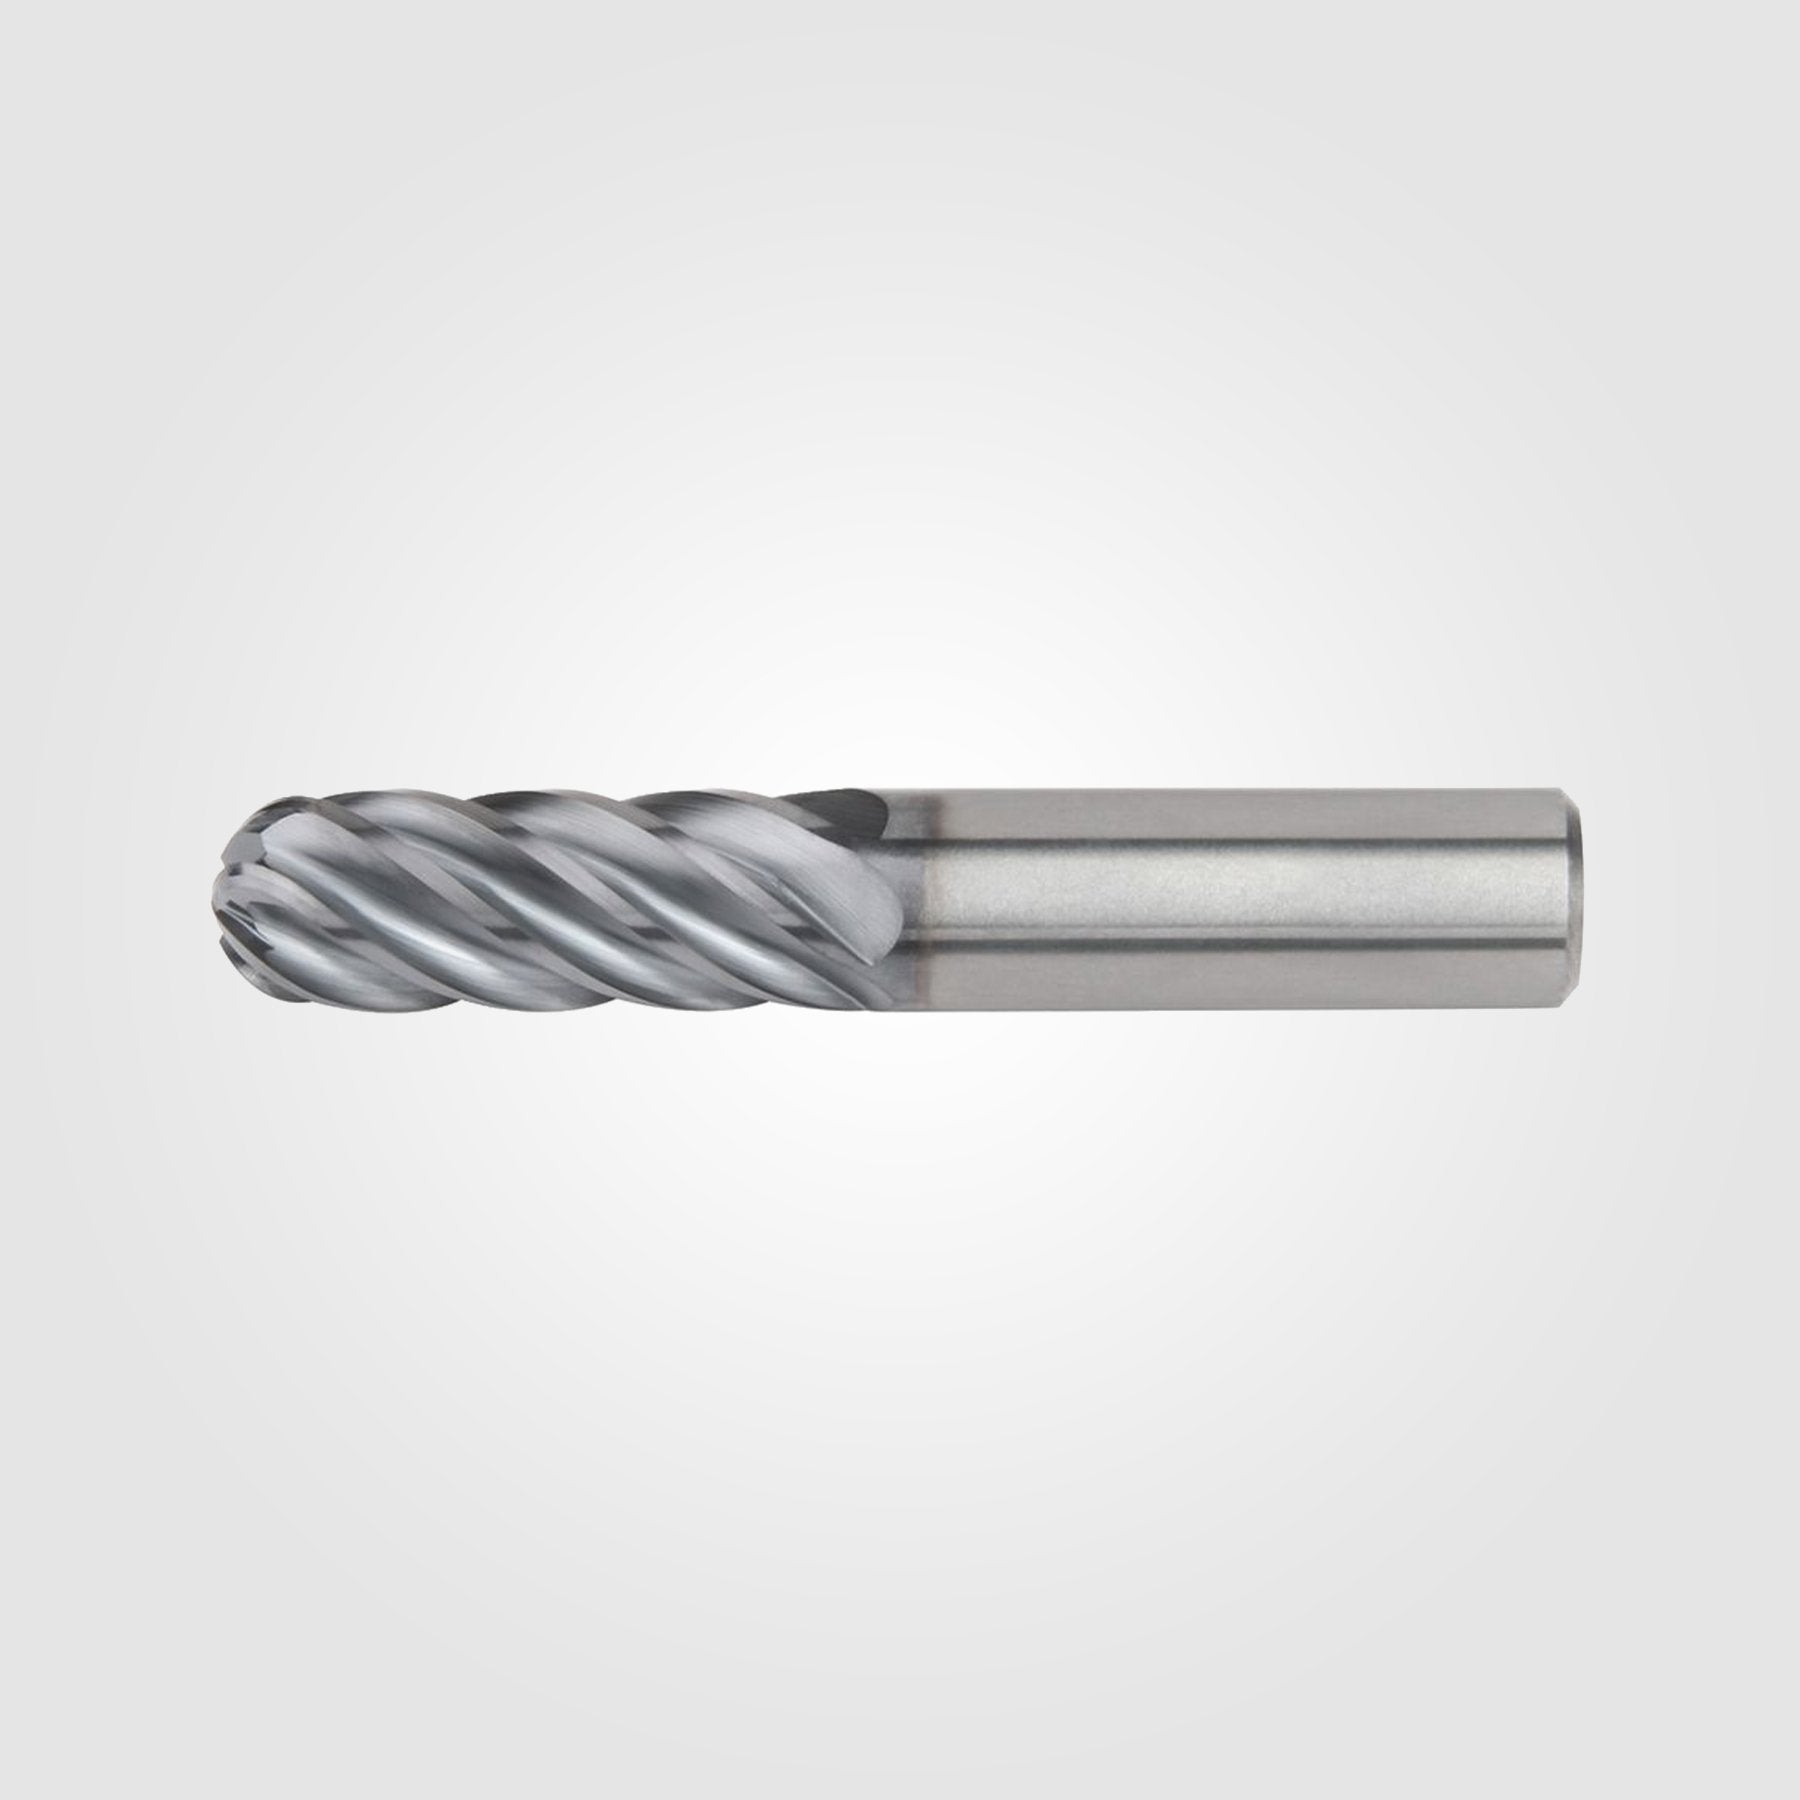 HARVI III (BALL NOSE AEROSPACE EXPANSION) | 1/2" x 1/2" x 2" x 4" | 6 FLUTE SOLID CARBIDE ENDMILL | 6113135